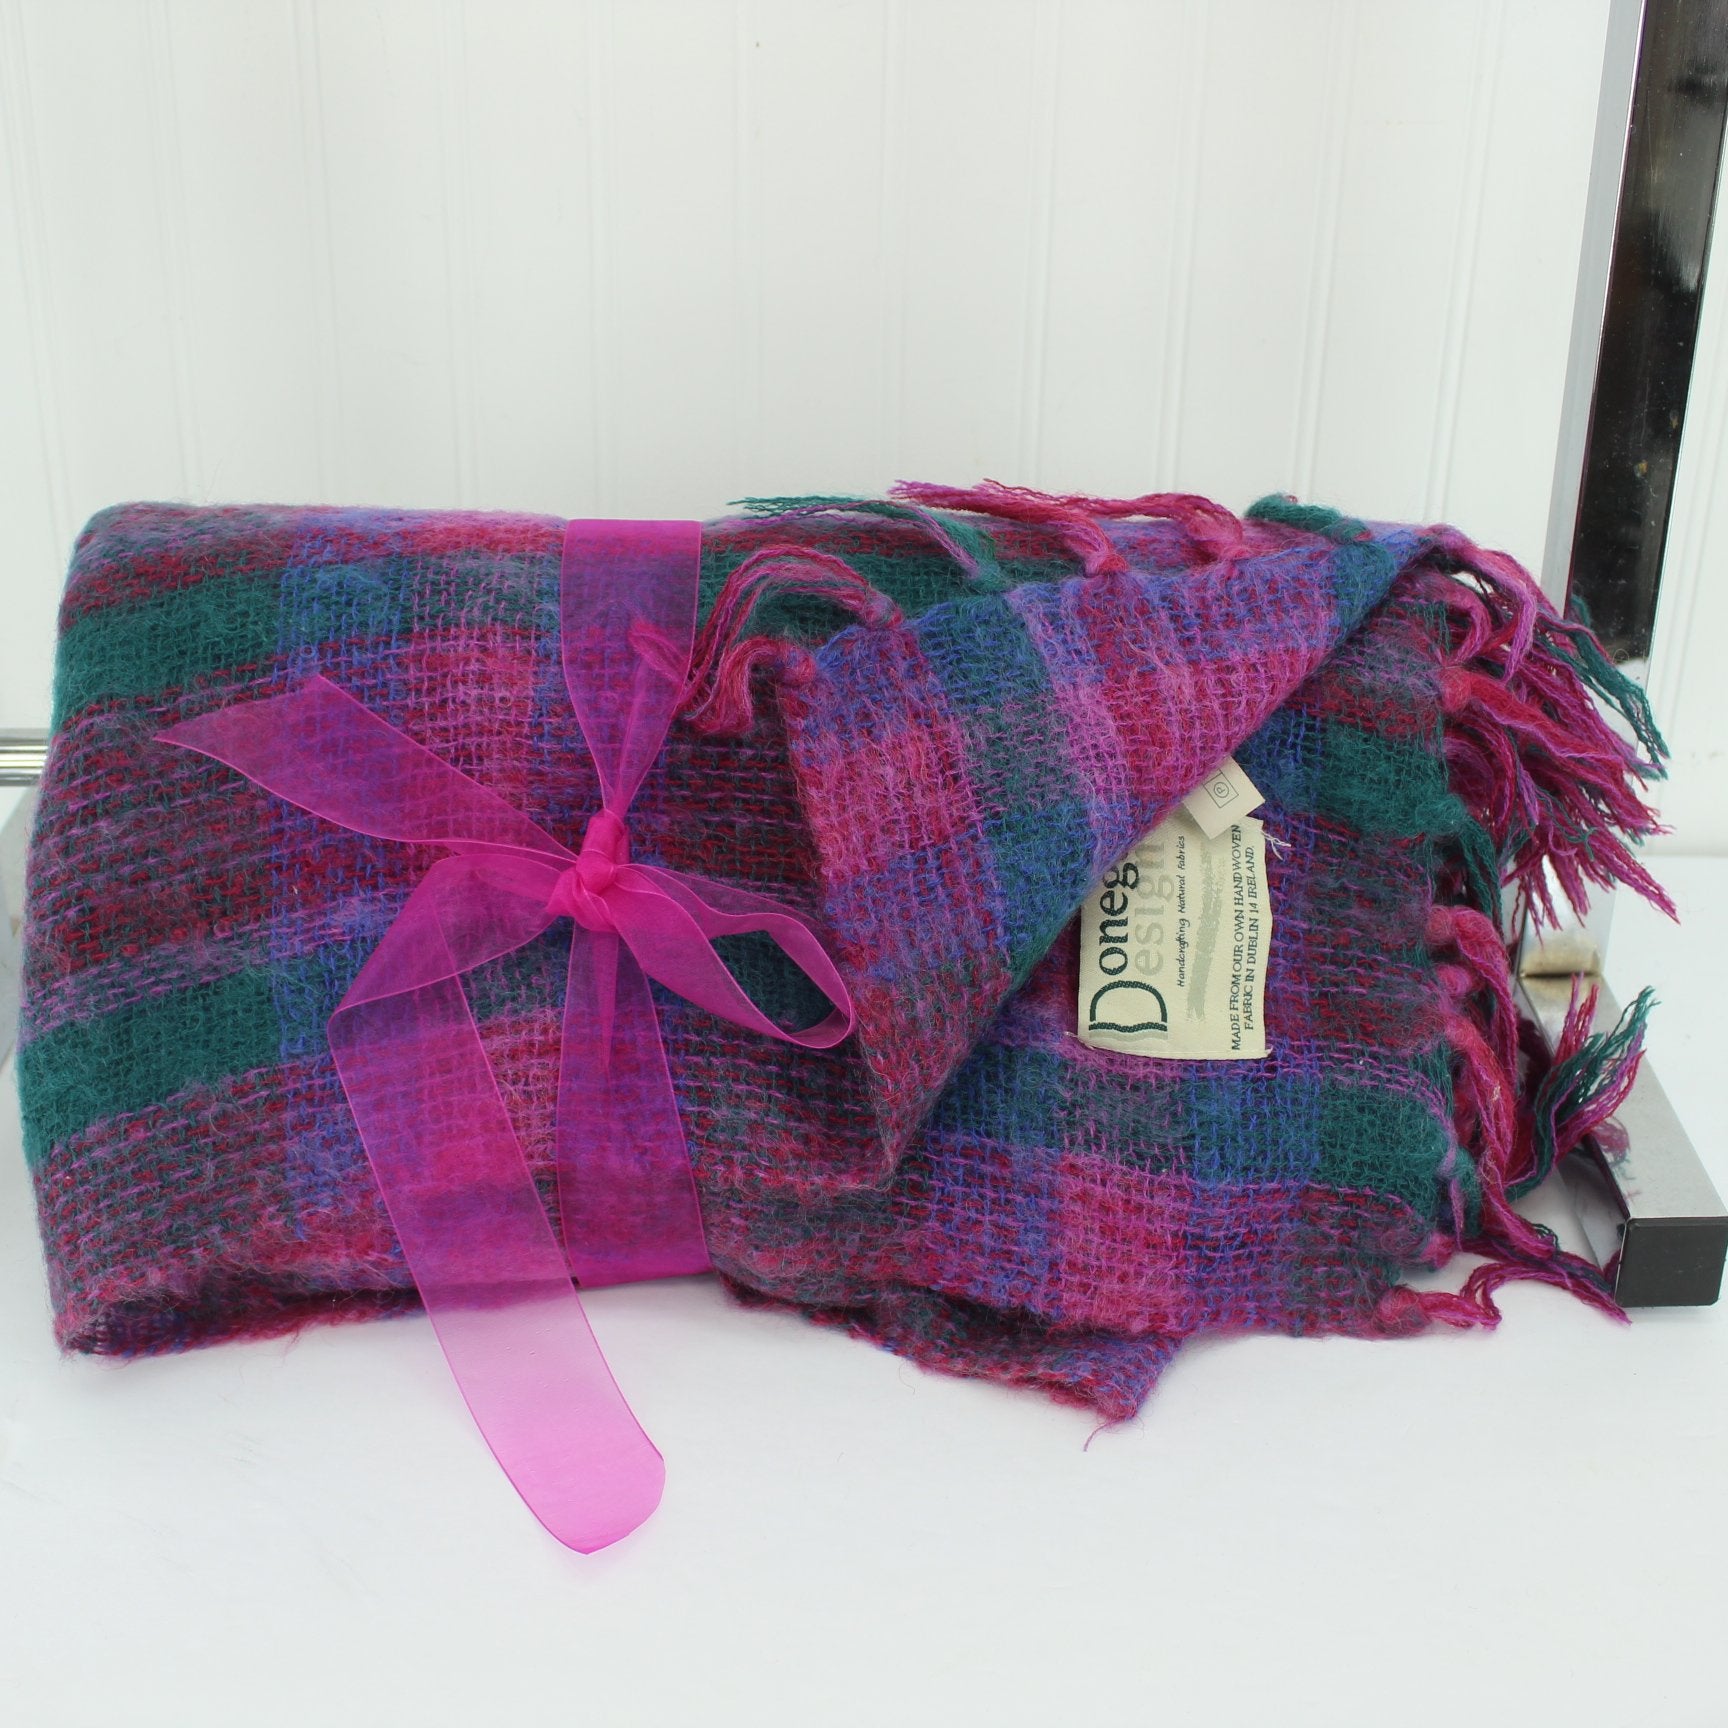 Donegal Hand Crafted Mohair Throw Blanket Awesome Jewel Colors Ireland beautiful gift for you or best friend